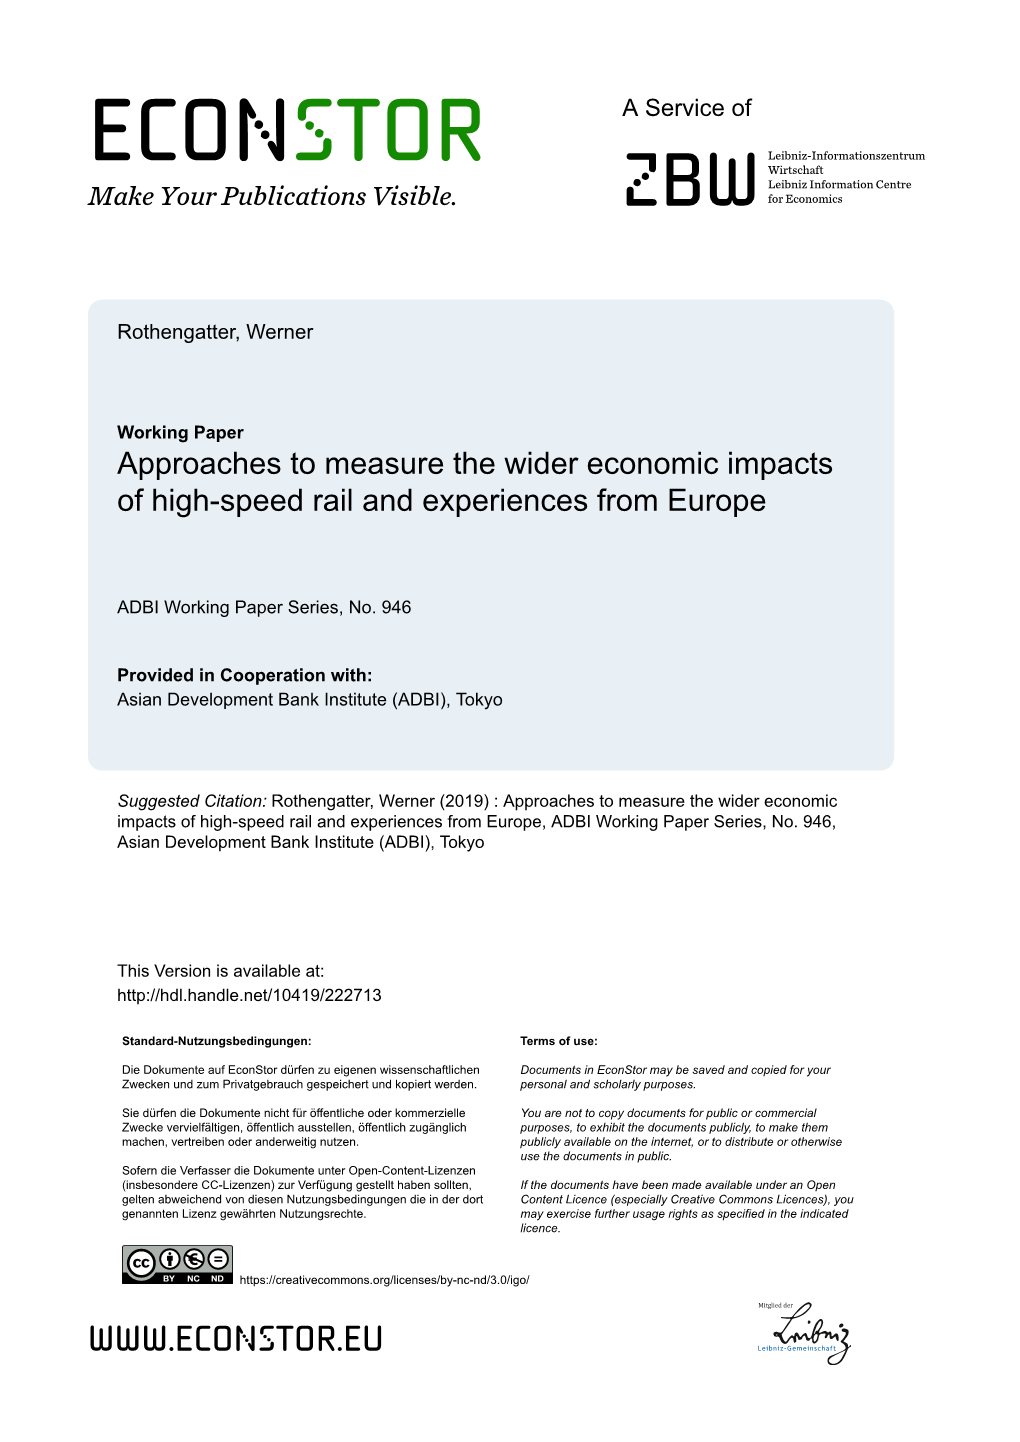 Approaches to Measure the Wider Economic Impacts of High-Speed Rail and Experiences from Europe